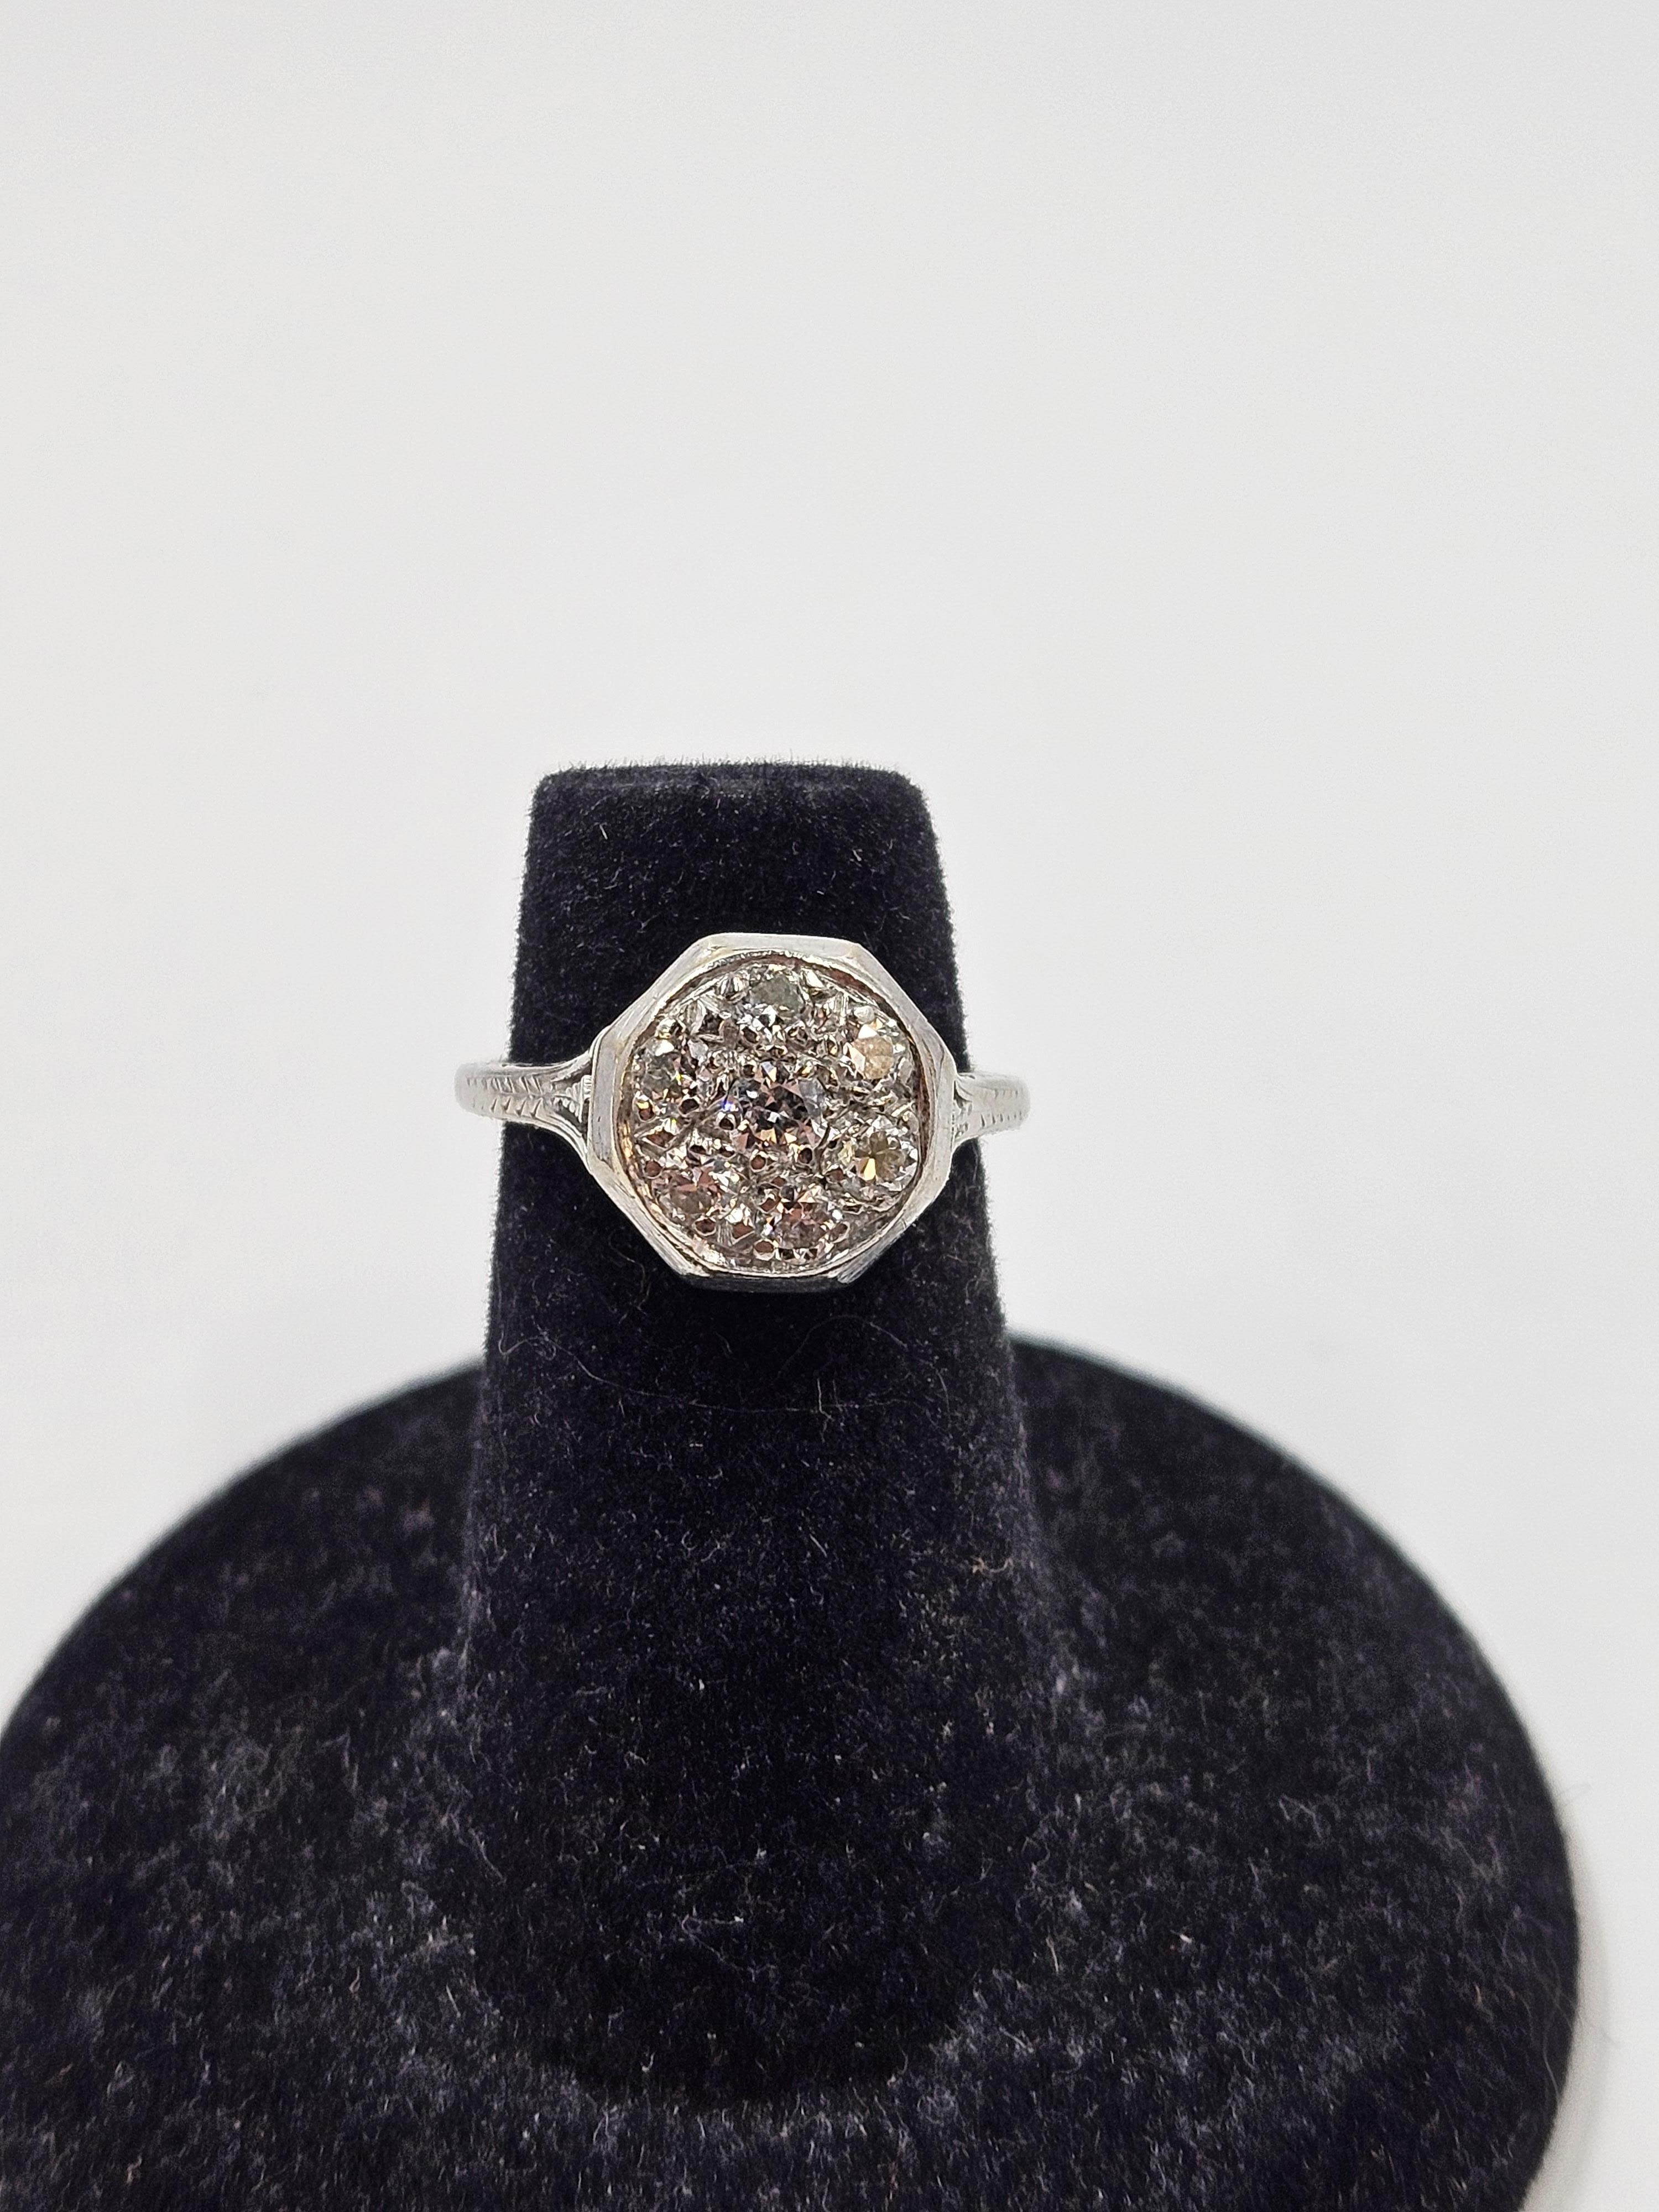 Antique art deco 18K white gold diamond daisy cluster ring. Size 3.75. Features 7 3mm diamonds. The ring weighs 3.3 grams and has an 11mm head. There is minimal finish loss. Wear is consistent with age and use. The diamonds appear to be very clear